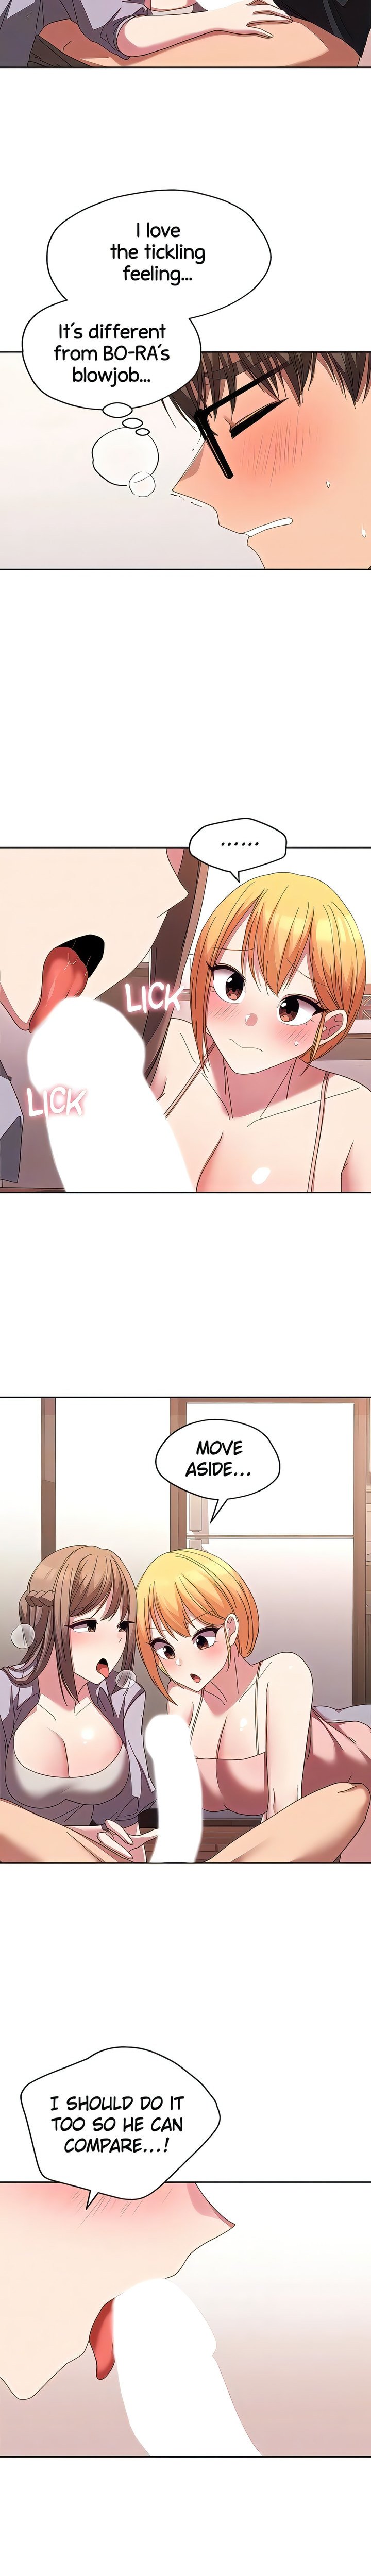 girls-i-used-to-teach-chap-32-5